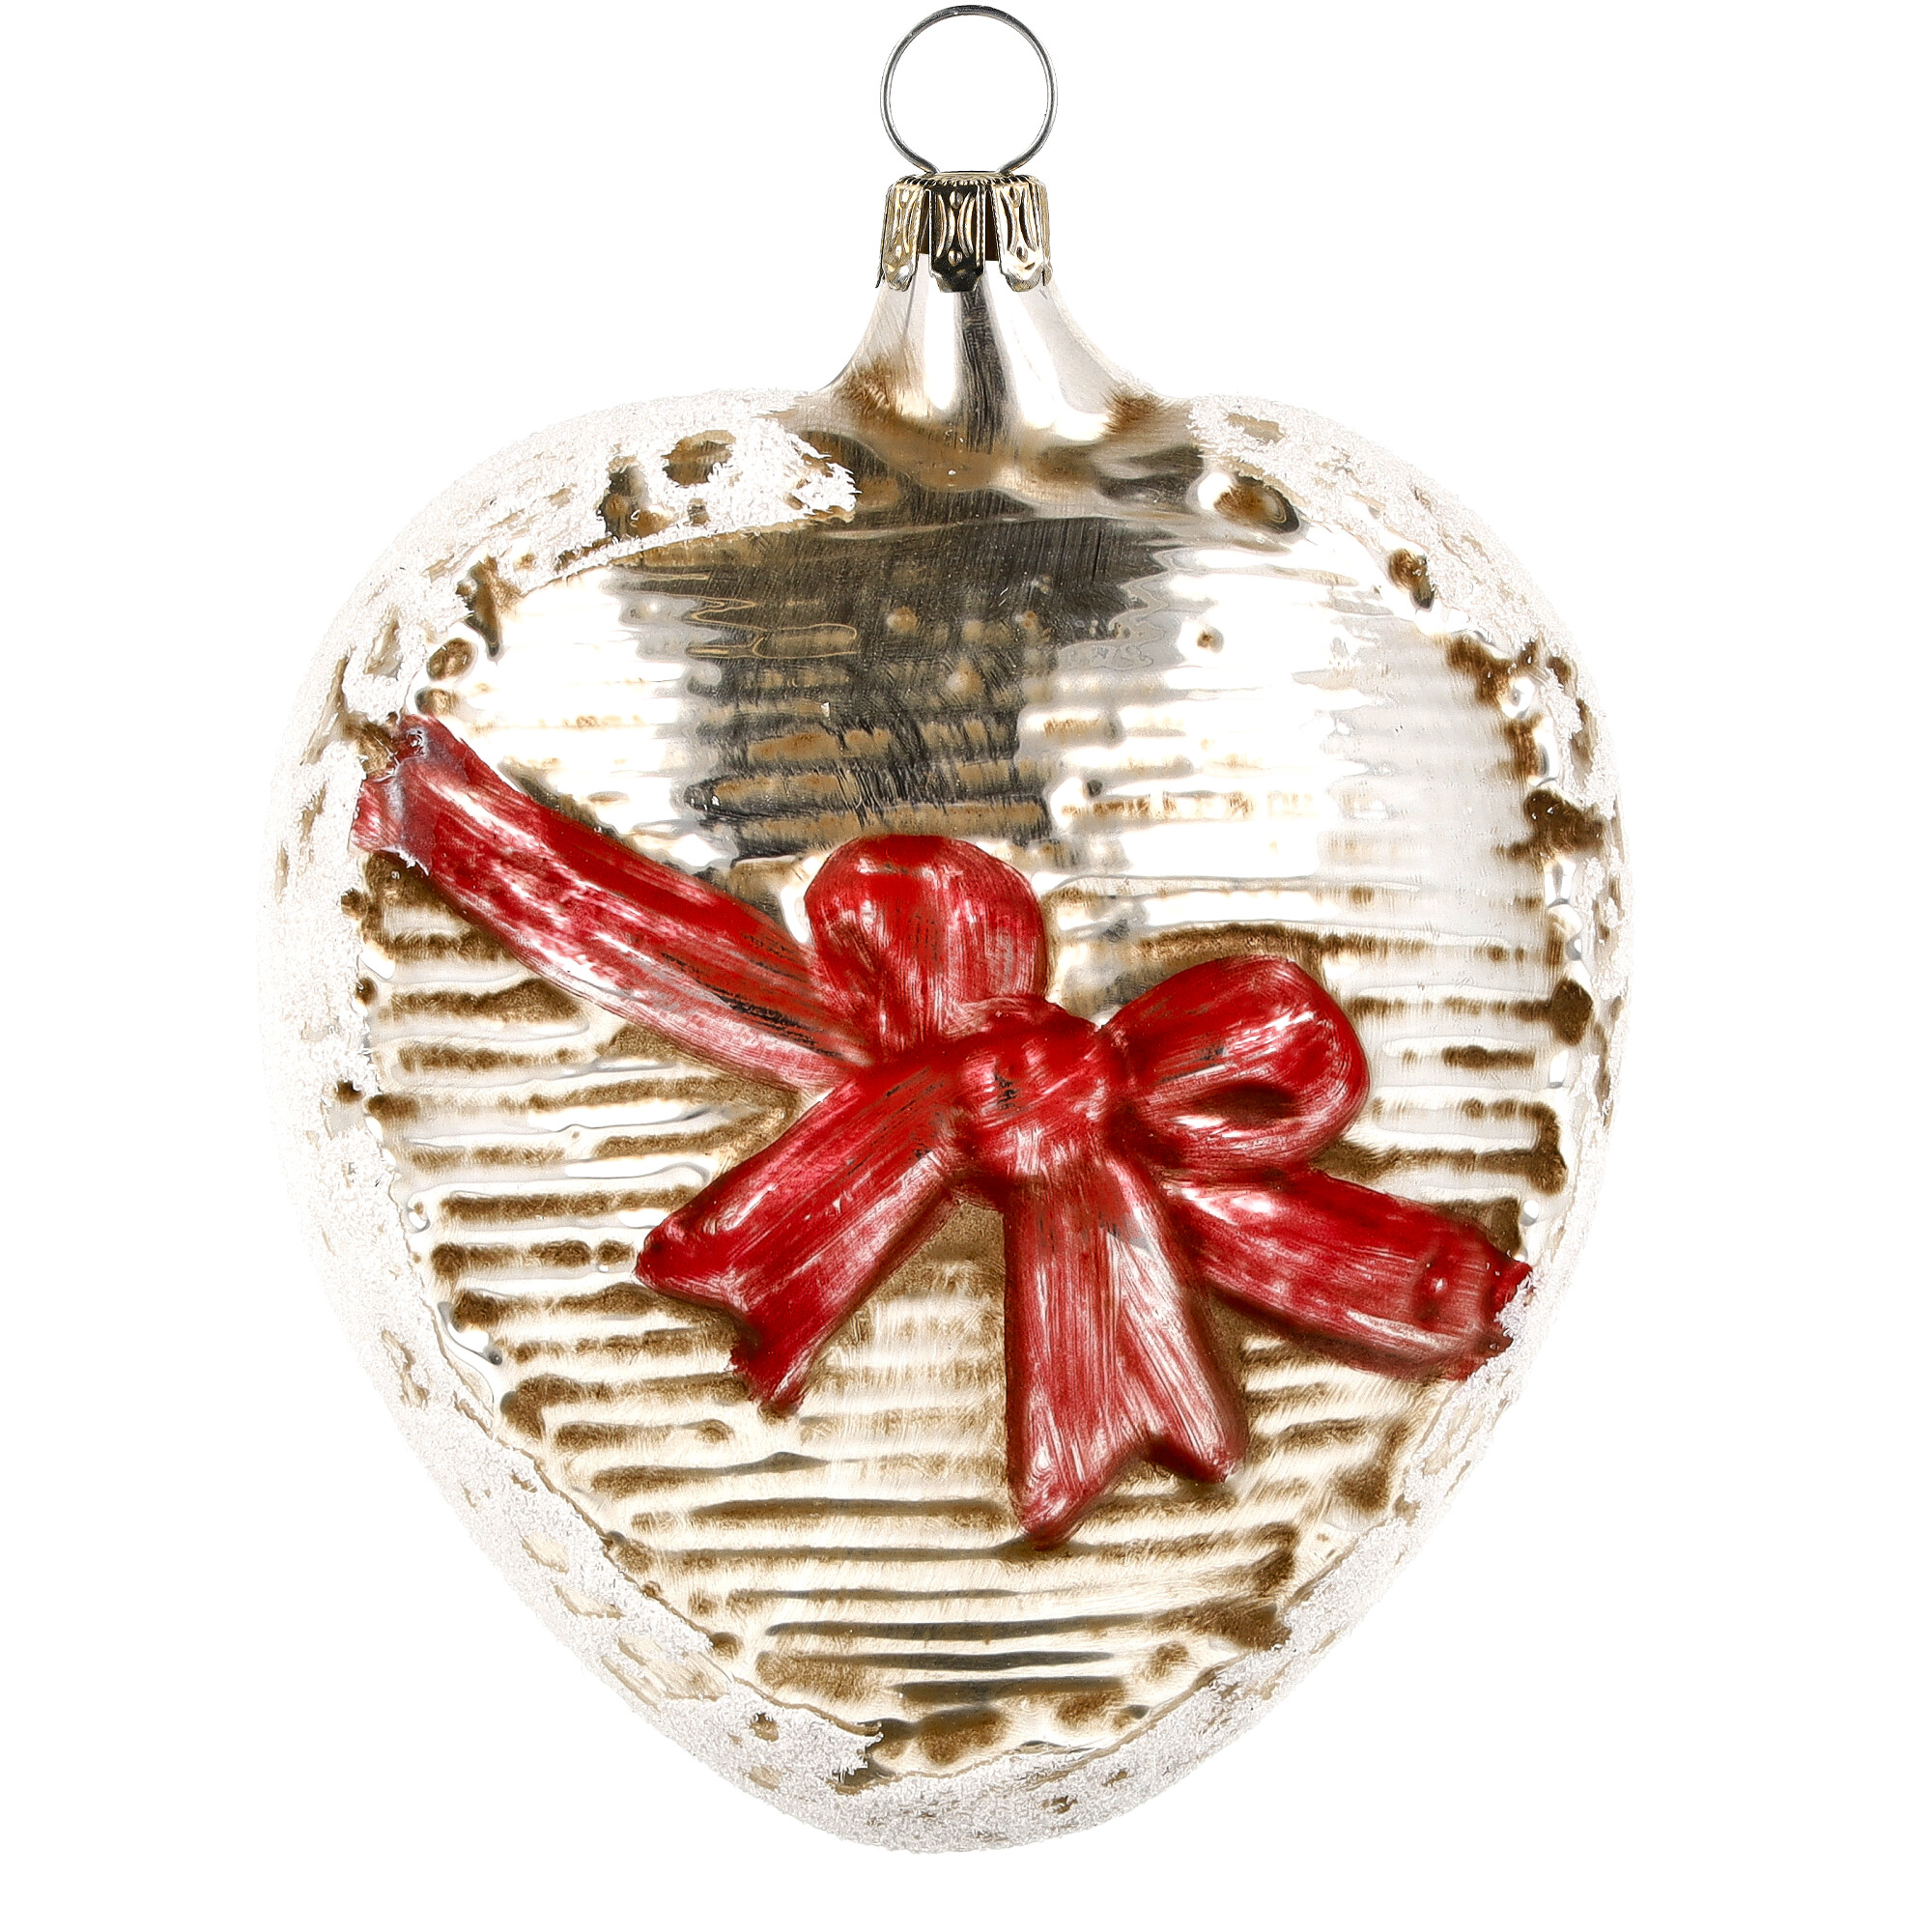 Retro Vintage style Christmas Glass Ornament - Large Heart with red ribbon